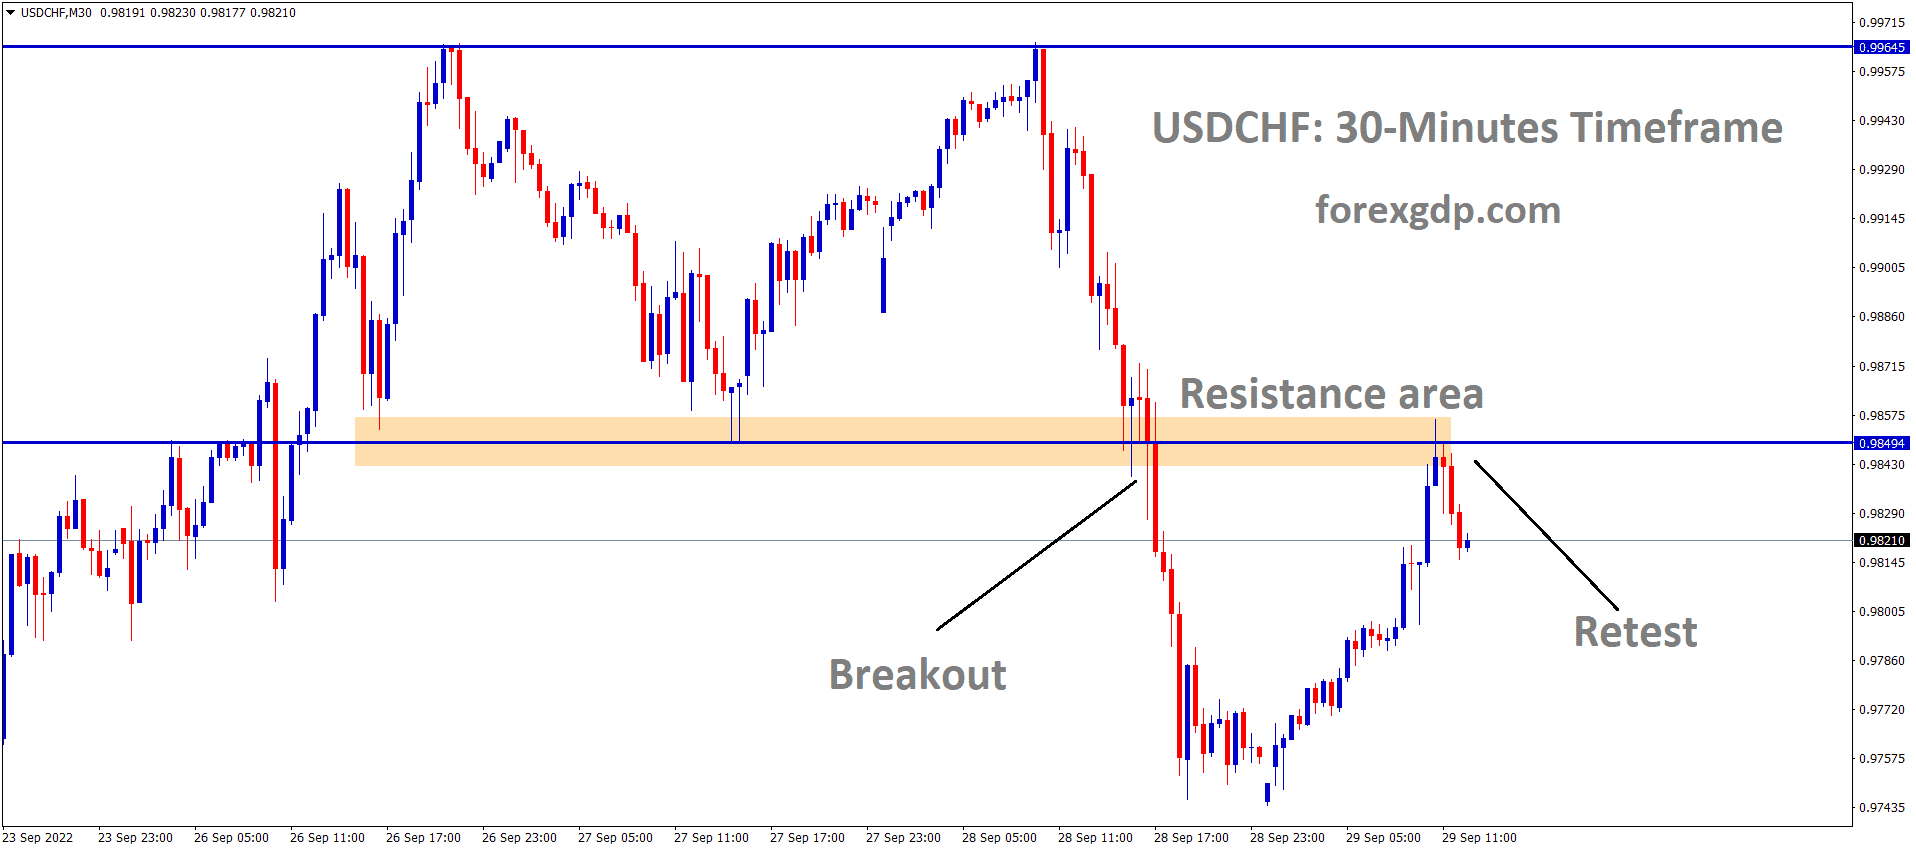 USDCHF has broken the Box pattern and the market is retested the Resistance area and Fallen from the Resistance area.